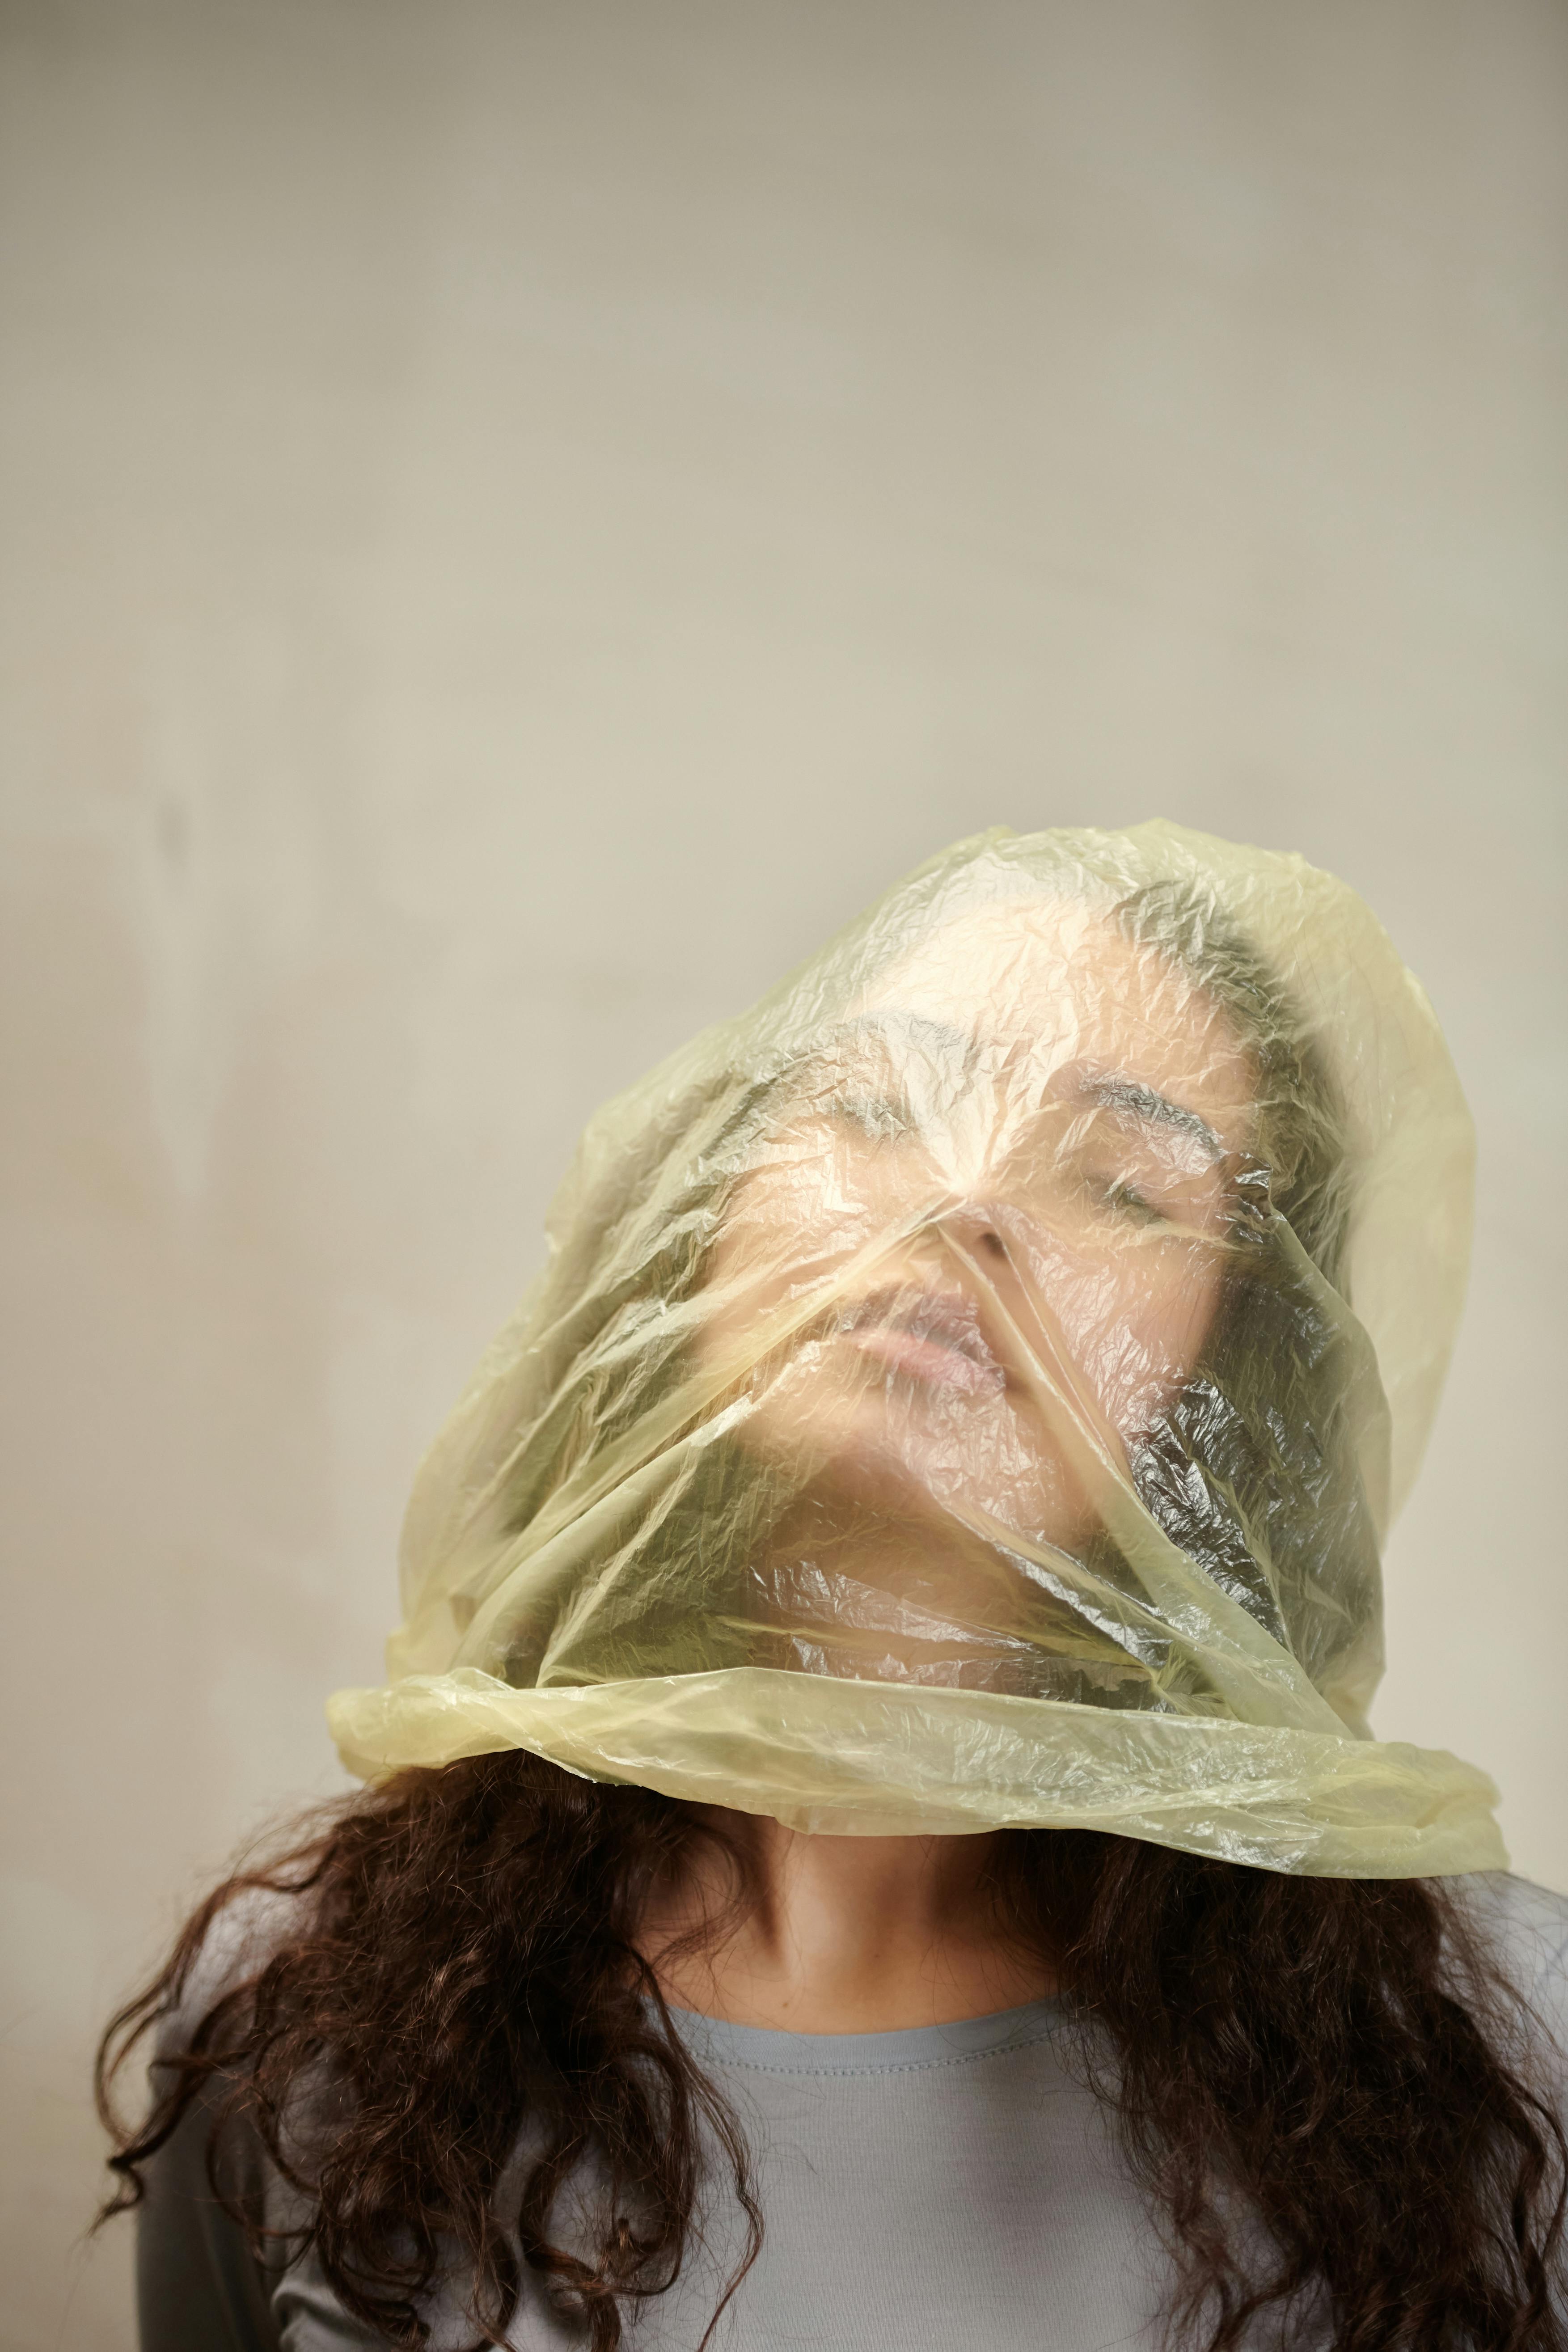 A Woman Wearing Bag on Her HEad · Free Stock Photo